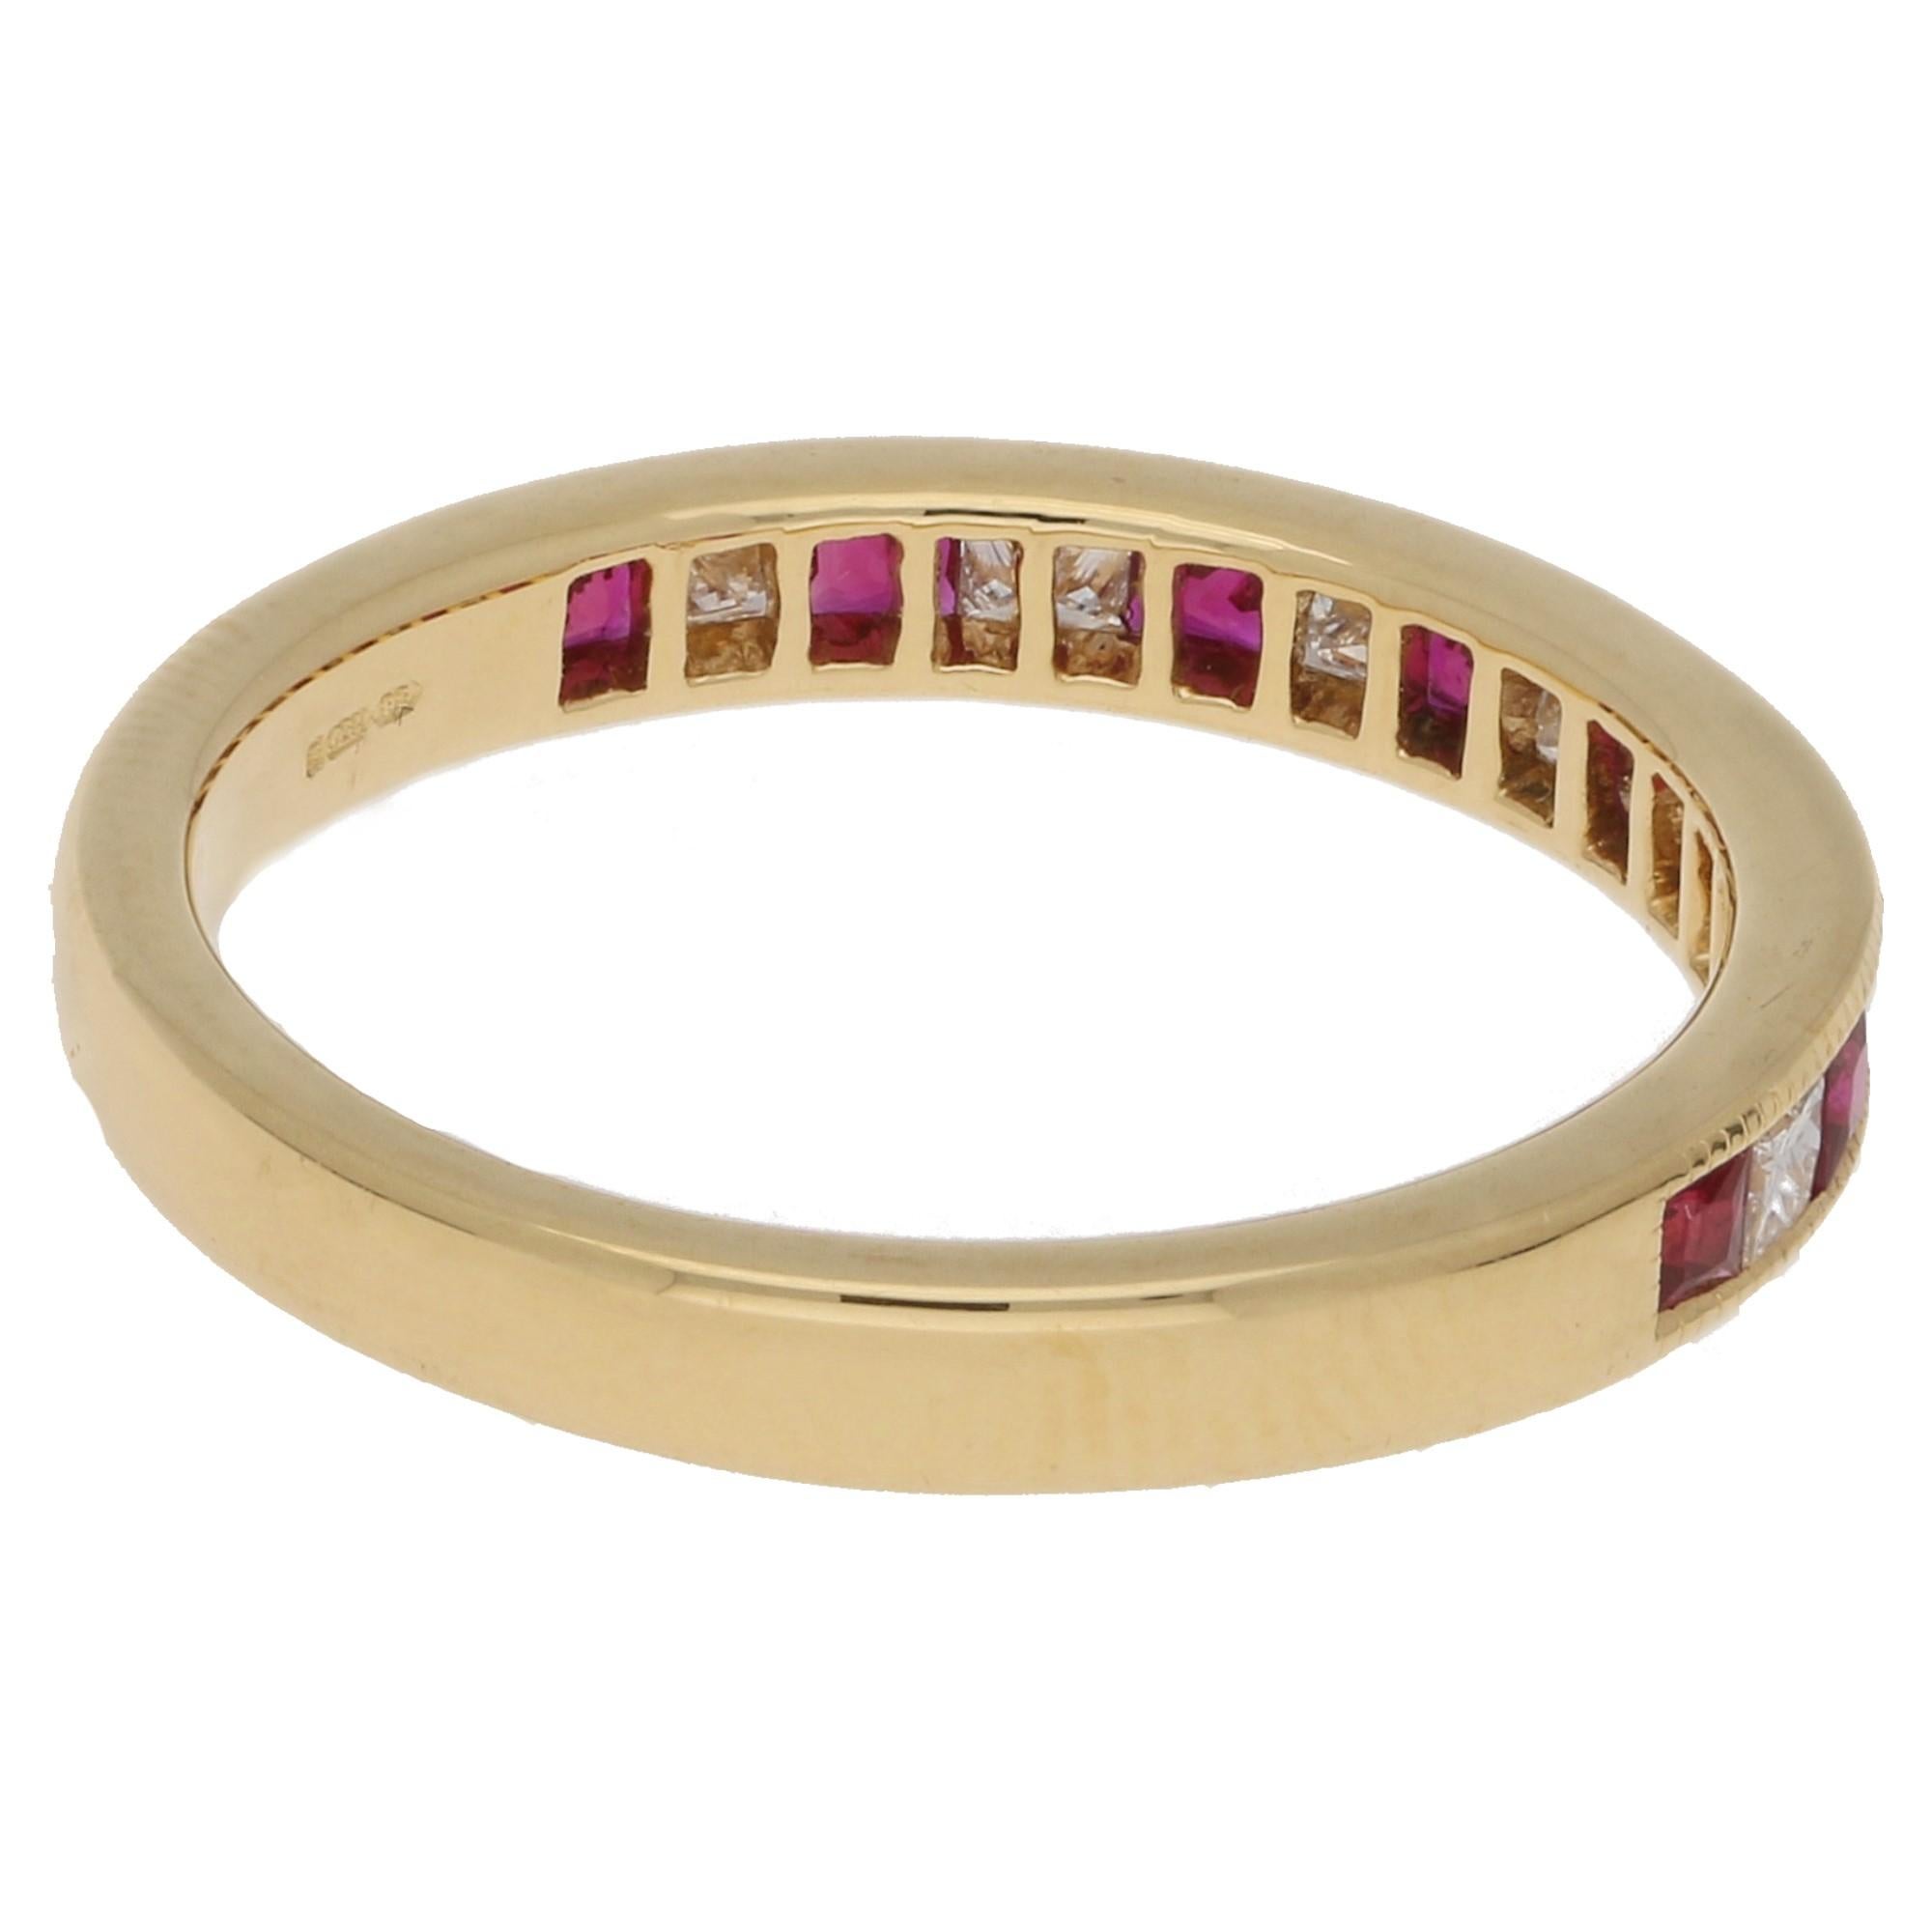 An 18ct yellow gold ruby and diamond set half eternity ring. The ring is set with 0.58ct's of intense ruby and 0.31ct's diamond. The edges have a delicate millegrain detailing. This ring is an M 1/2, but can potentially be sized upon request.